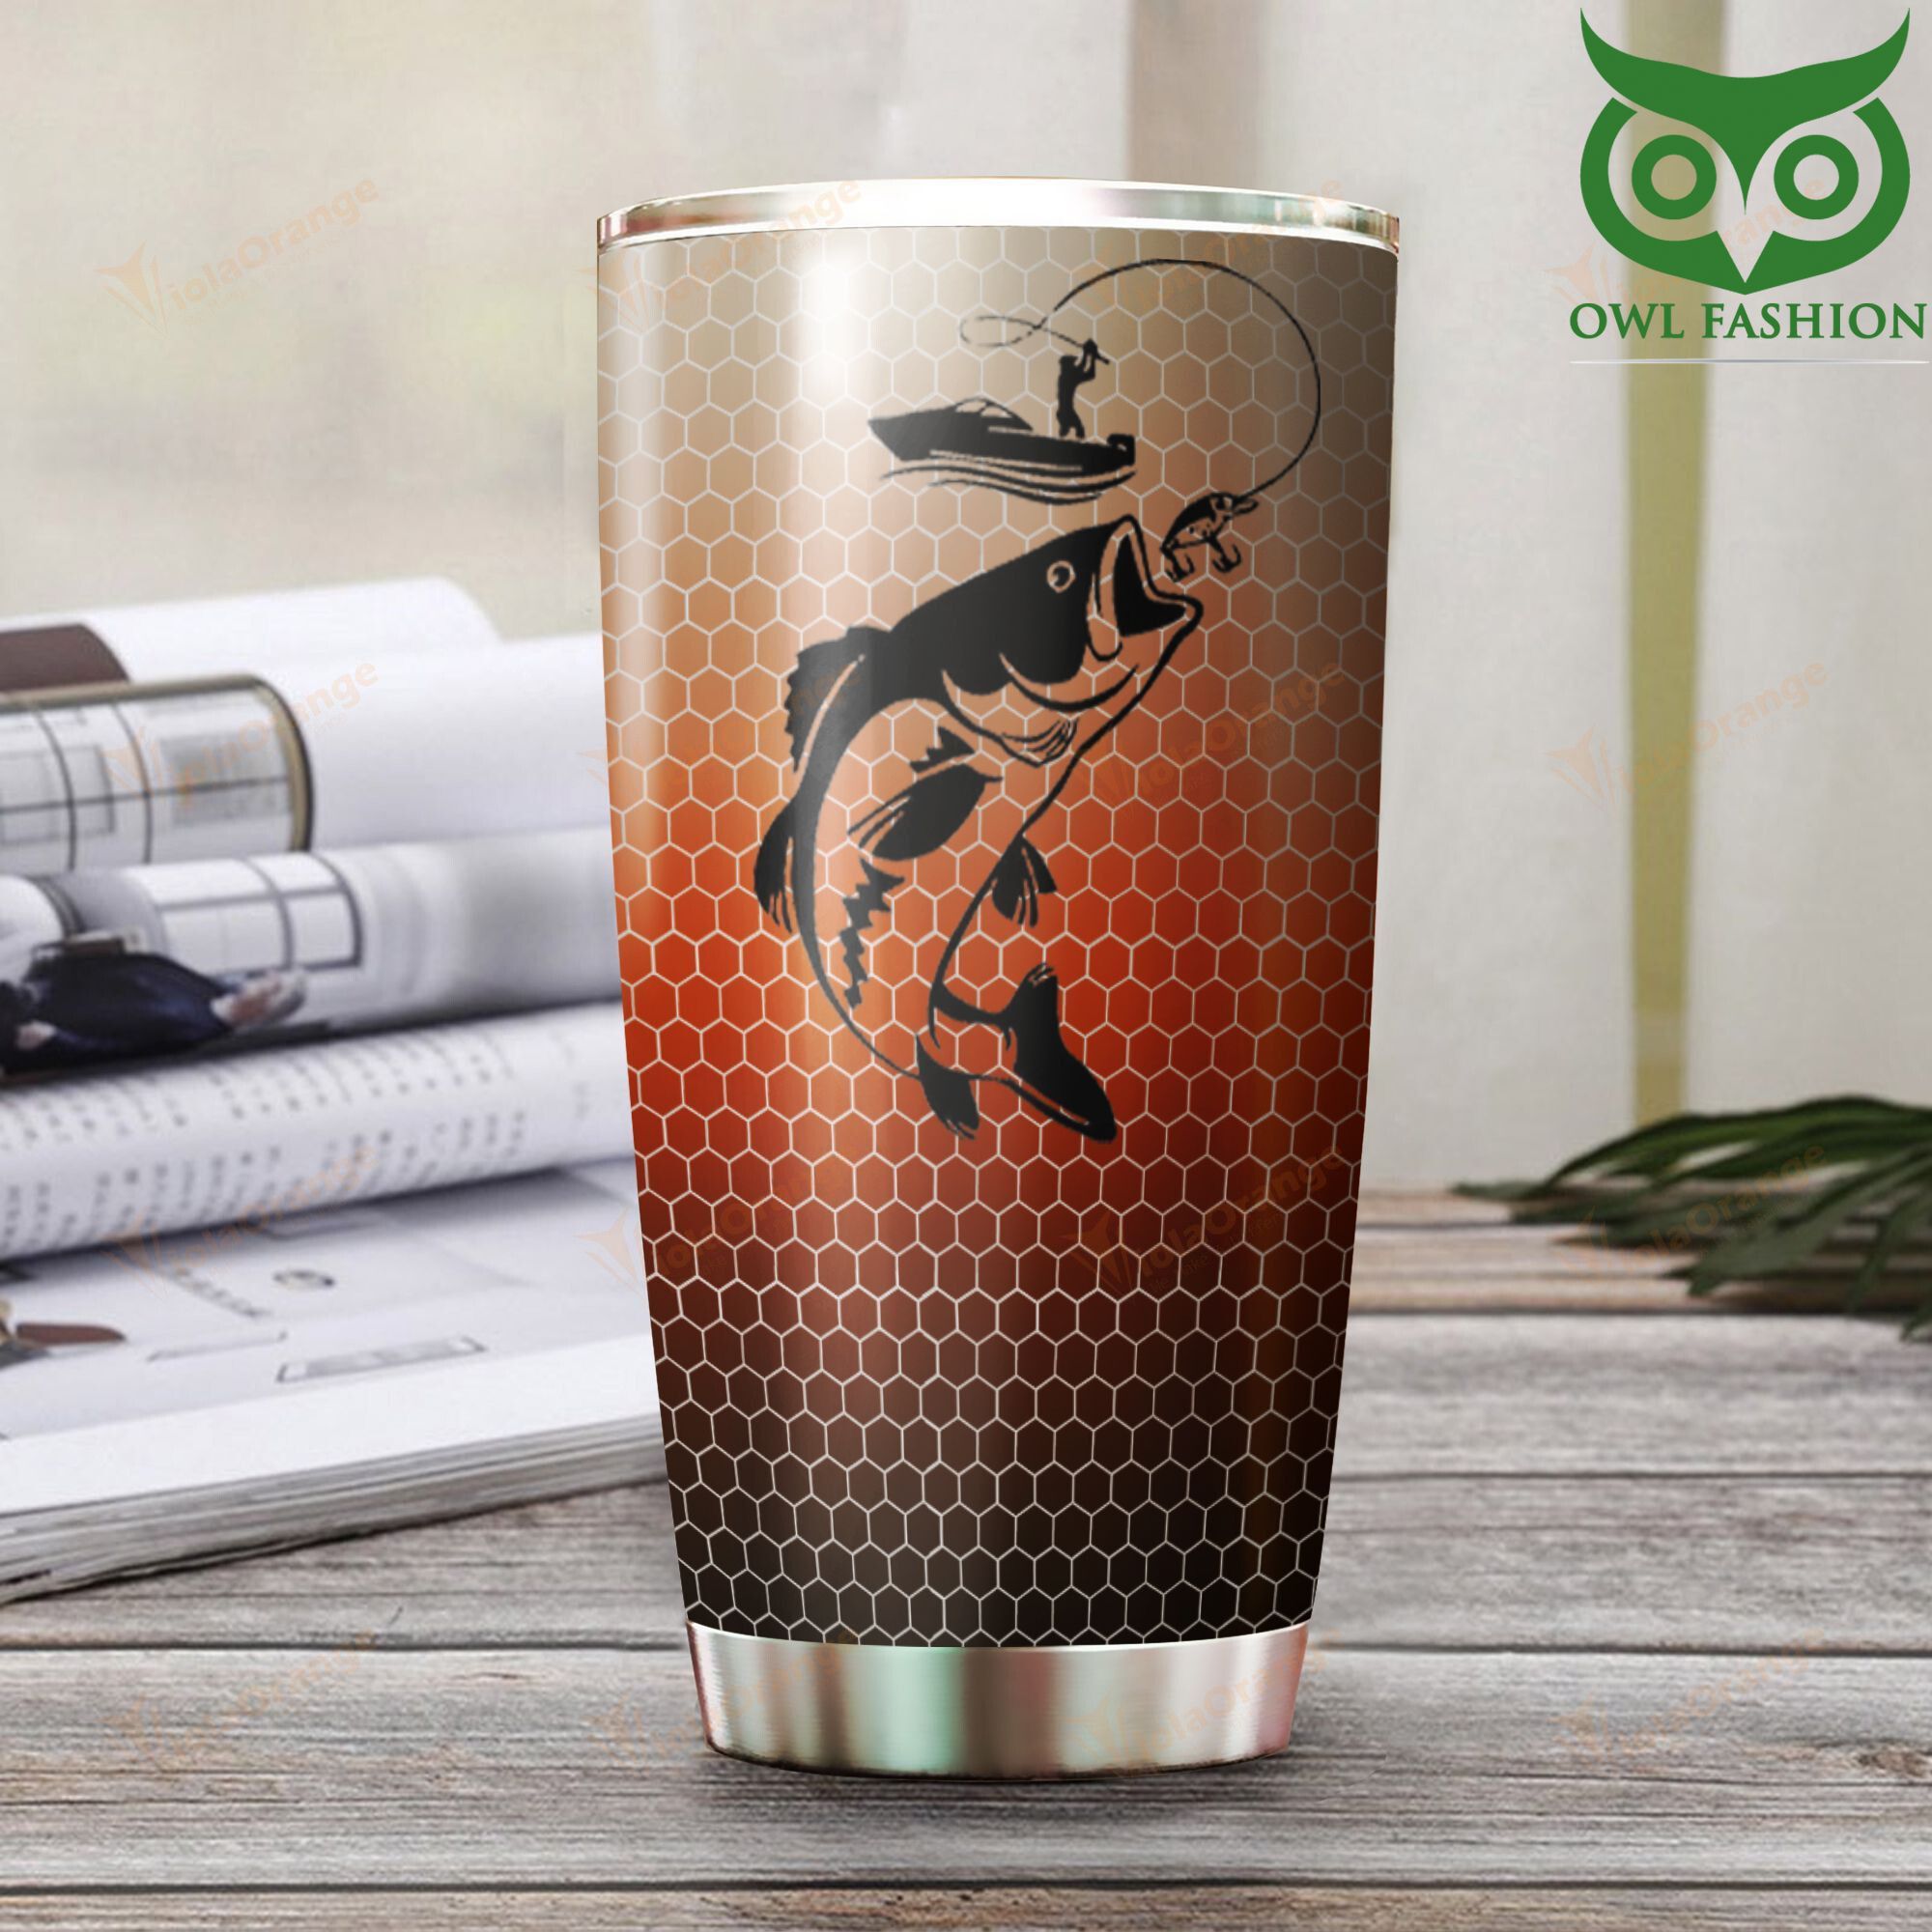 19 SPECIAL Fishing stainless steel Tumbler cup